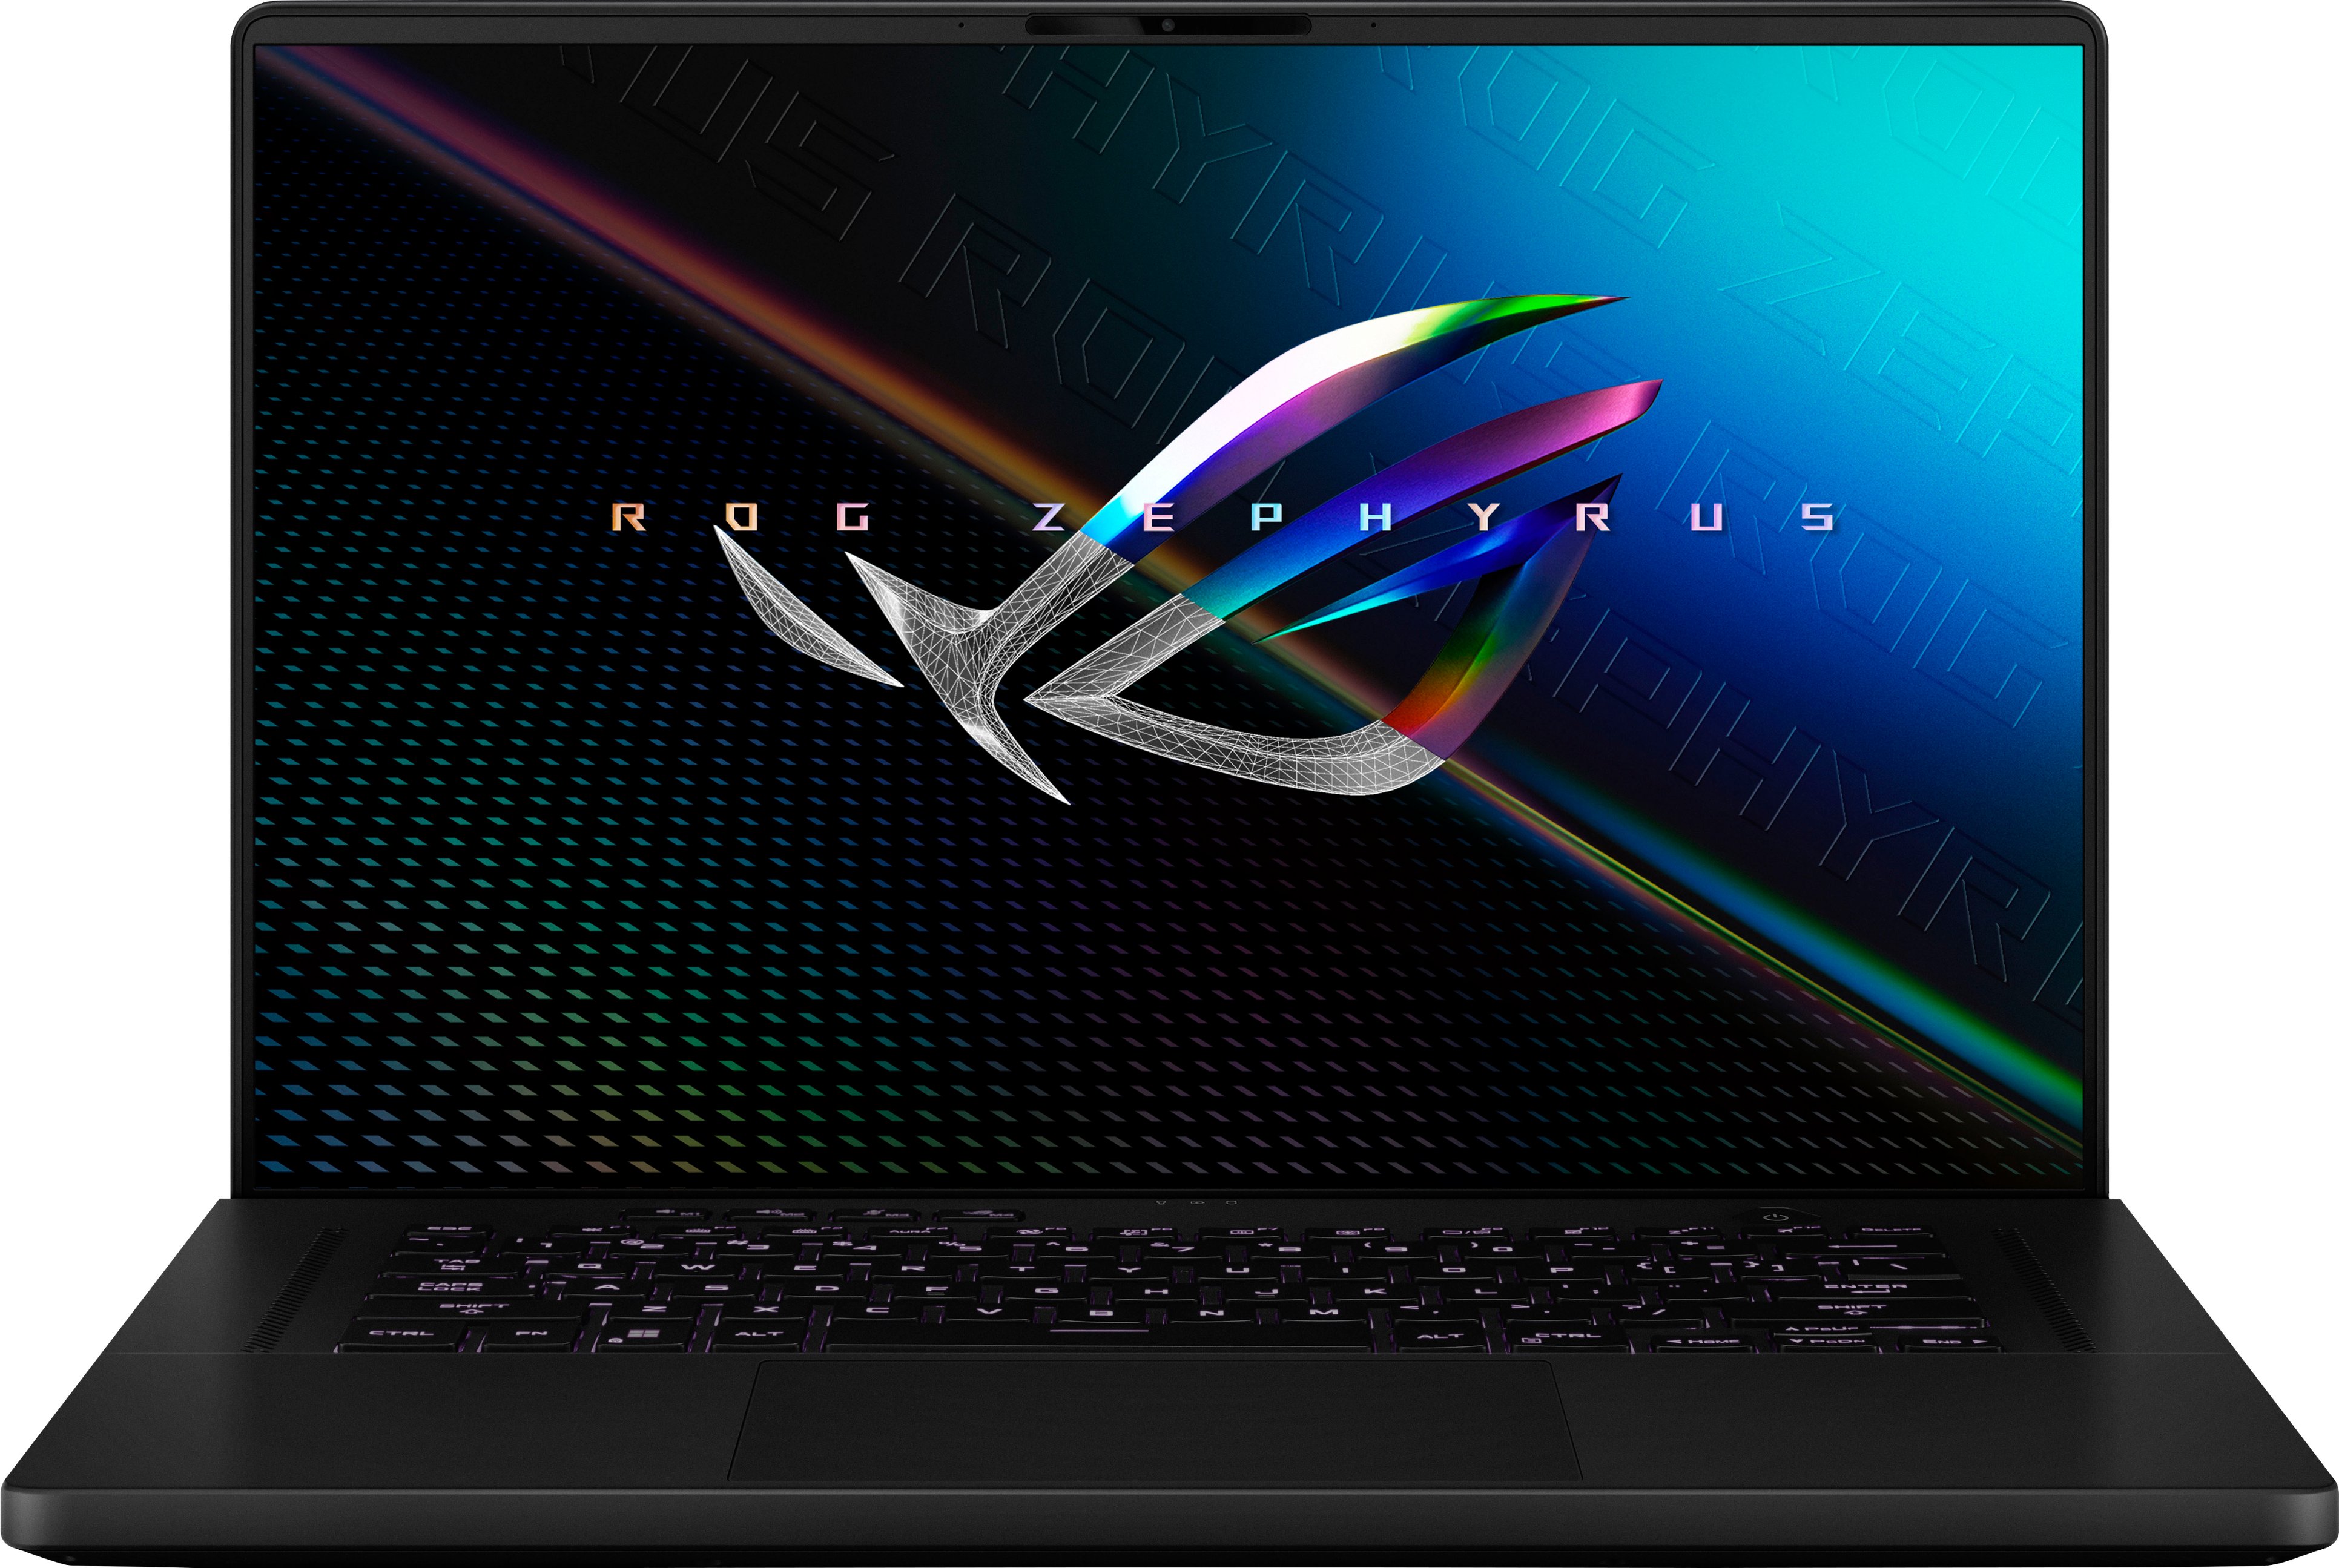 ASUS ROG Zephyrus M16 (Open-Box Excellent): 16" FHD+ IPS 165Hz, i7-12700, RTX 3060 (120W), 16GB DDR5, 512GB SSD $799.99